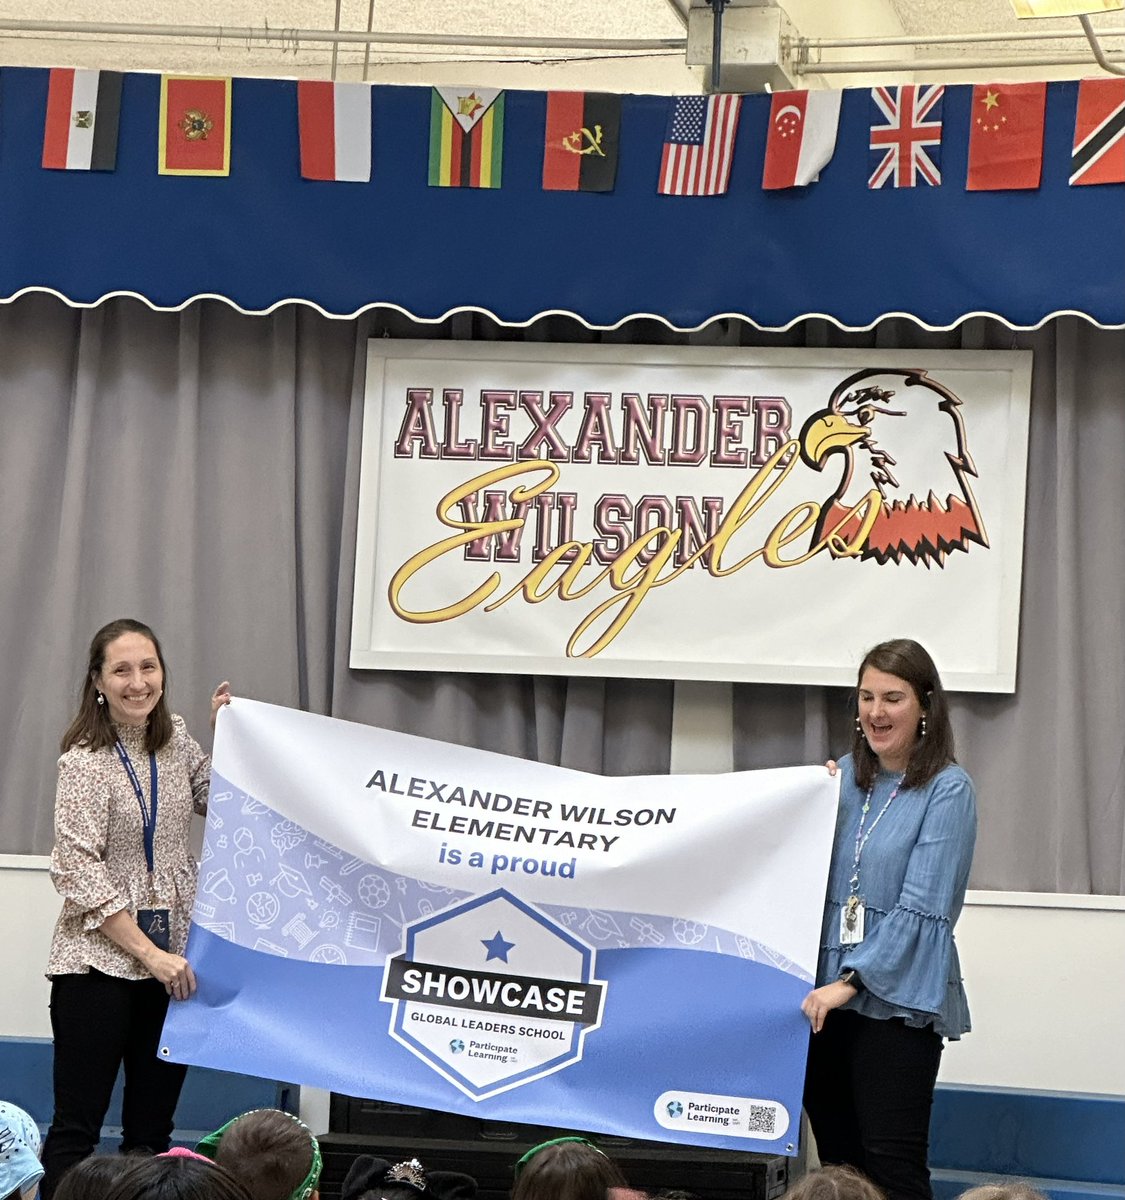 It was a joy to celebrate @AweEagles  reaching the #GlobalLeaders Showcase designation today! 🌍

We had so much fun watching outstanding student global presentations and handing out prizes. Congratulations on your achievement! 🎉

#UnitingOurWorld @ParticipateLrng @ABSSPublic